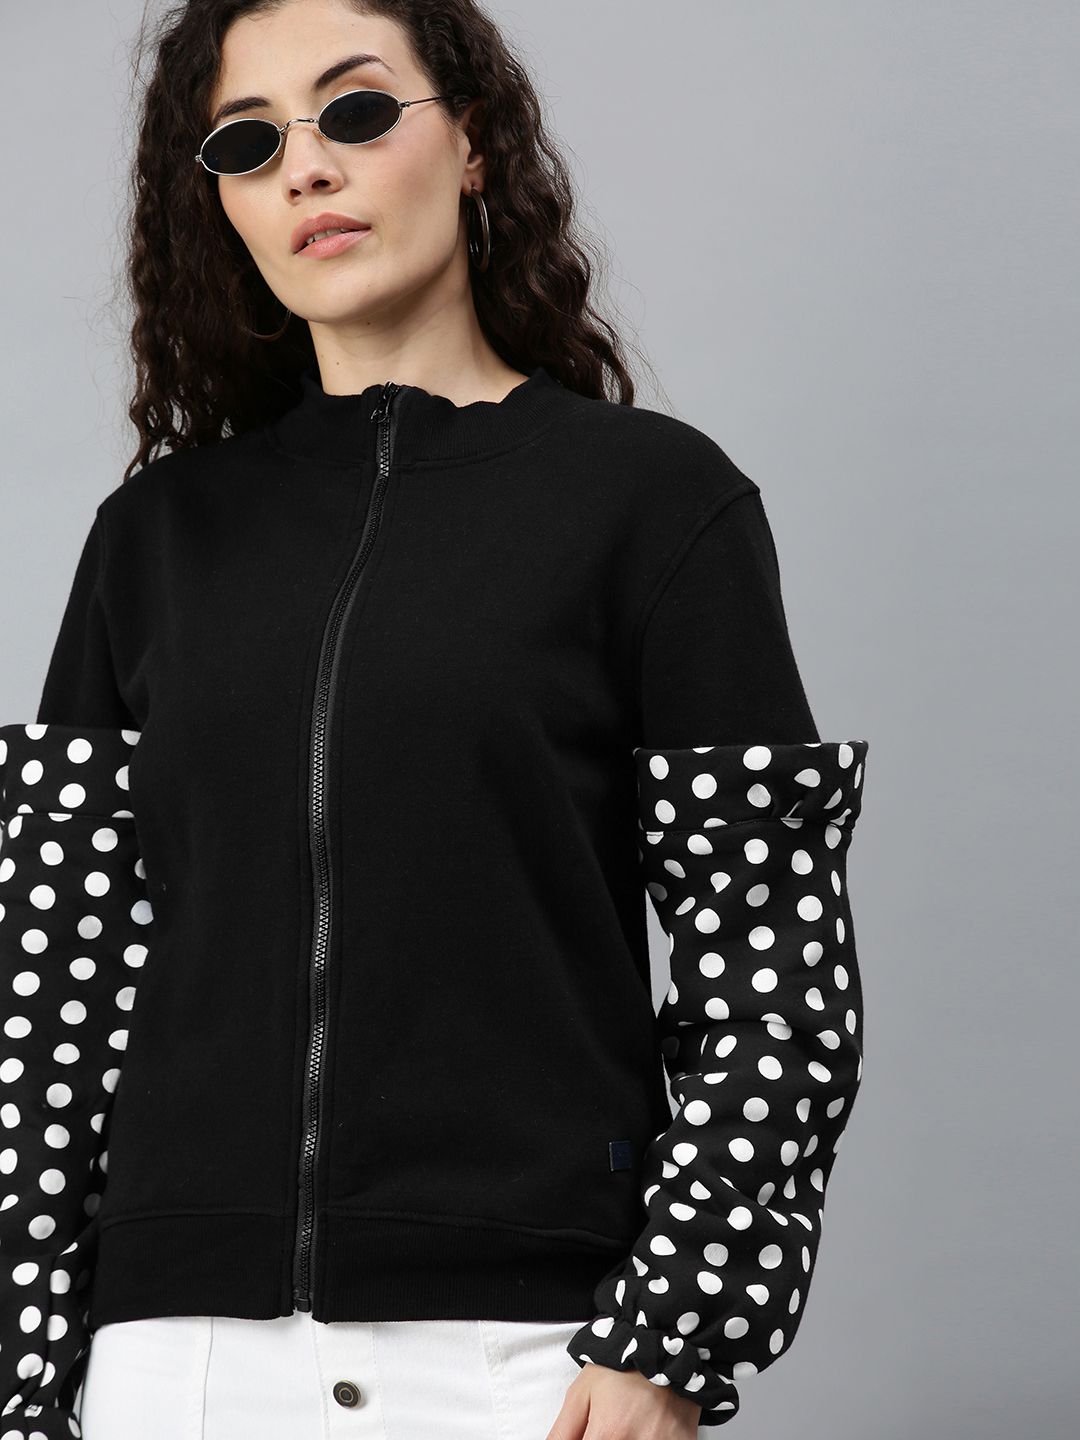 Campus Sutra Women Black Solid Front Open Sweatshirt with Polka Dots Detail Sleeves Price in India